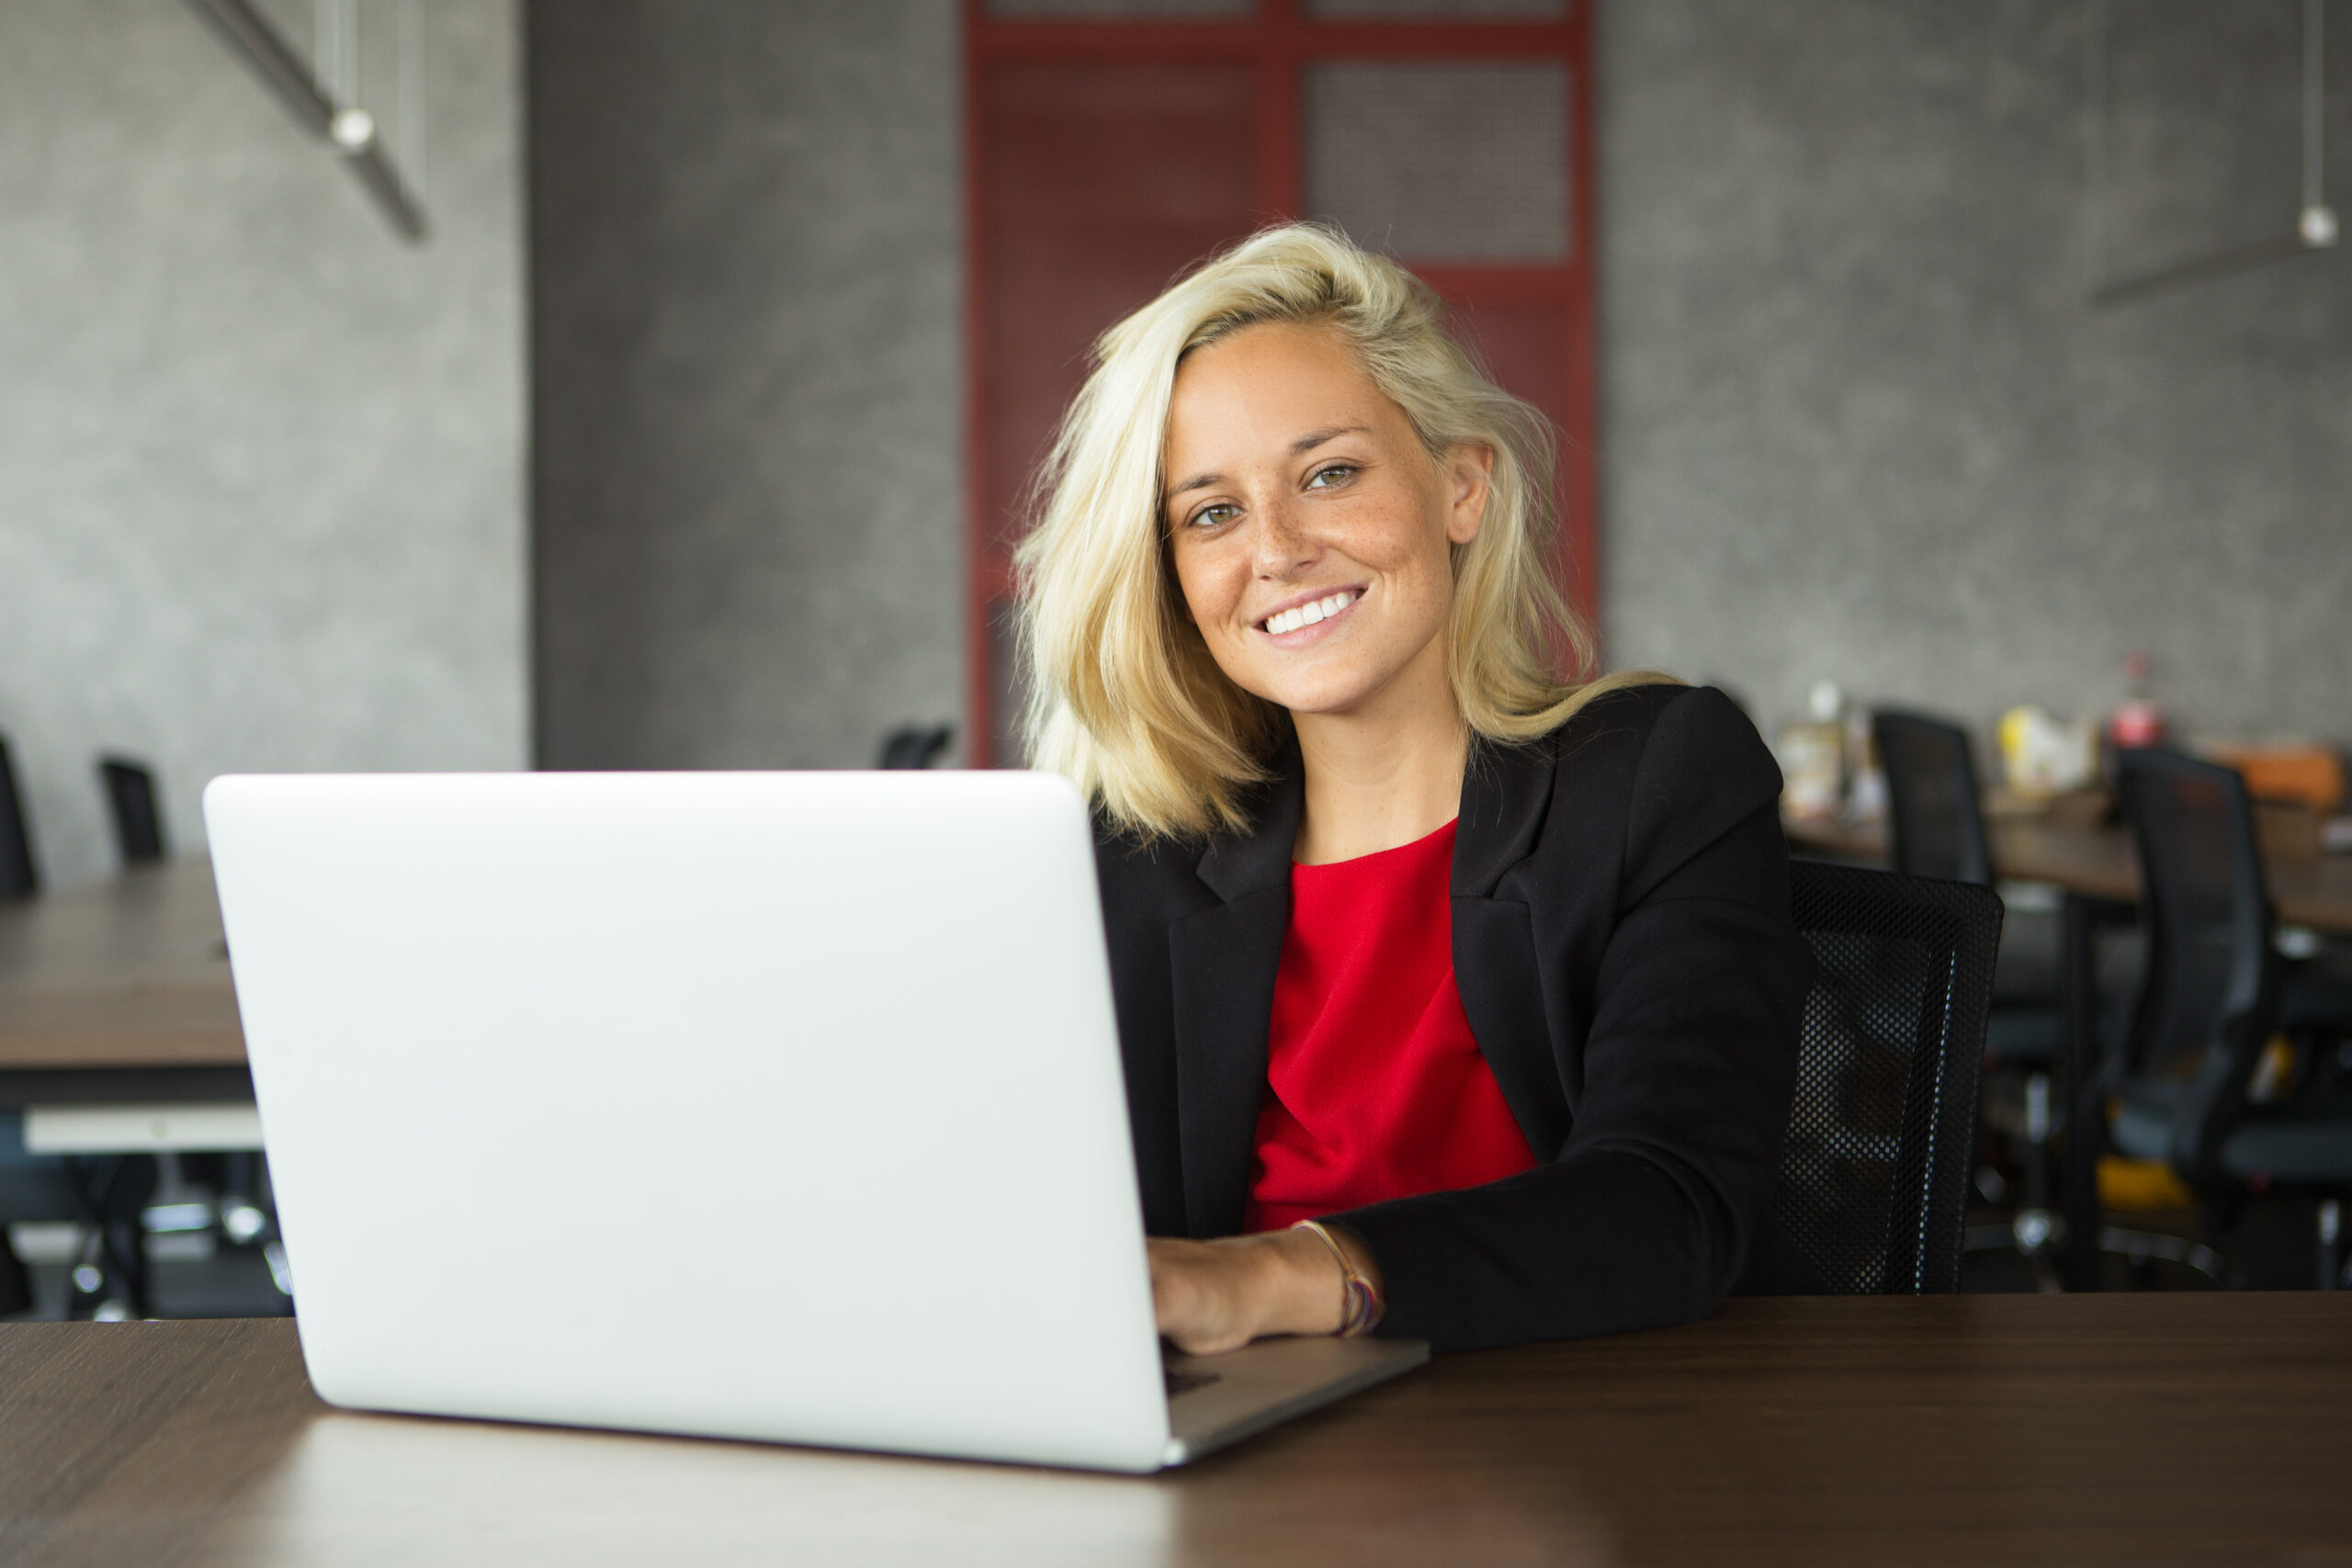 Smiling young businesswoman working at laptop